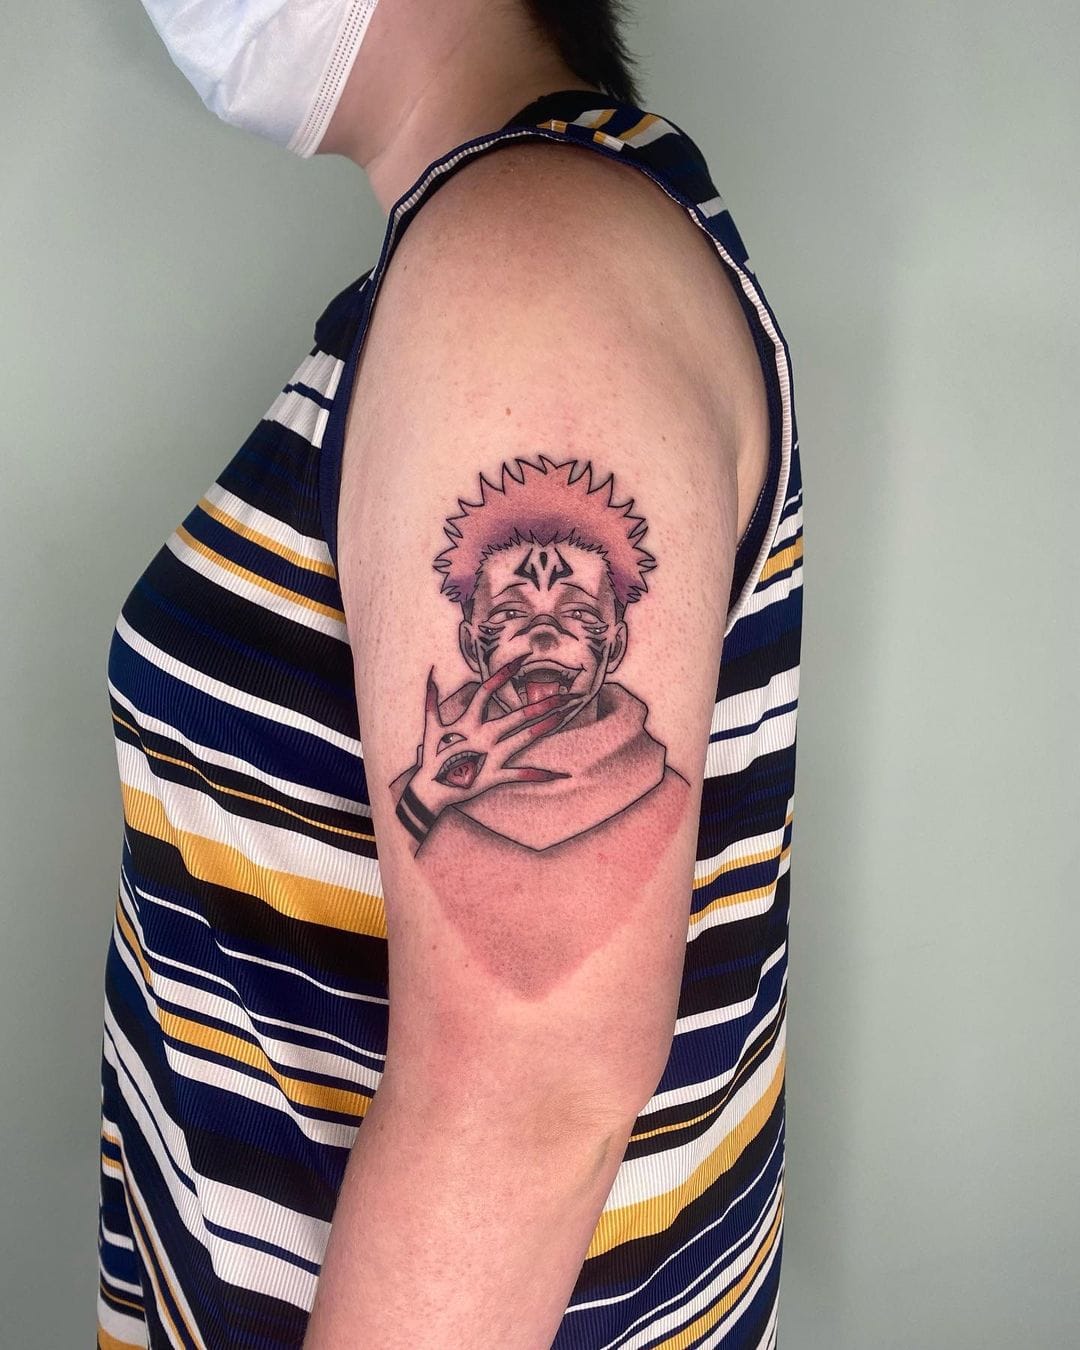 Sakuna Tattoos: A Journey Through Ink and Culture